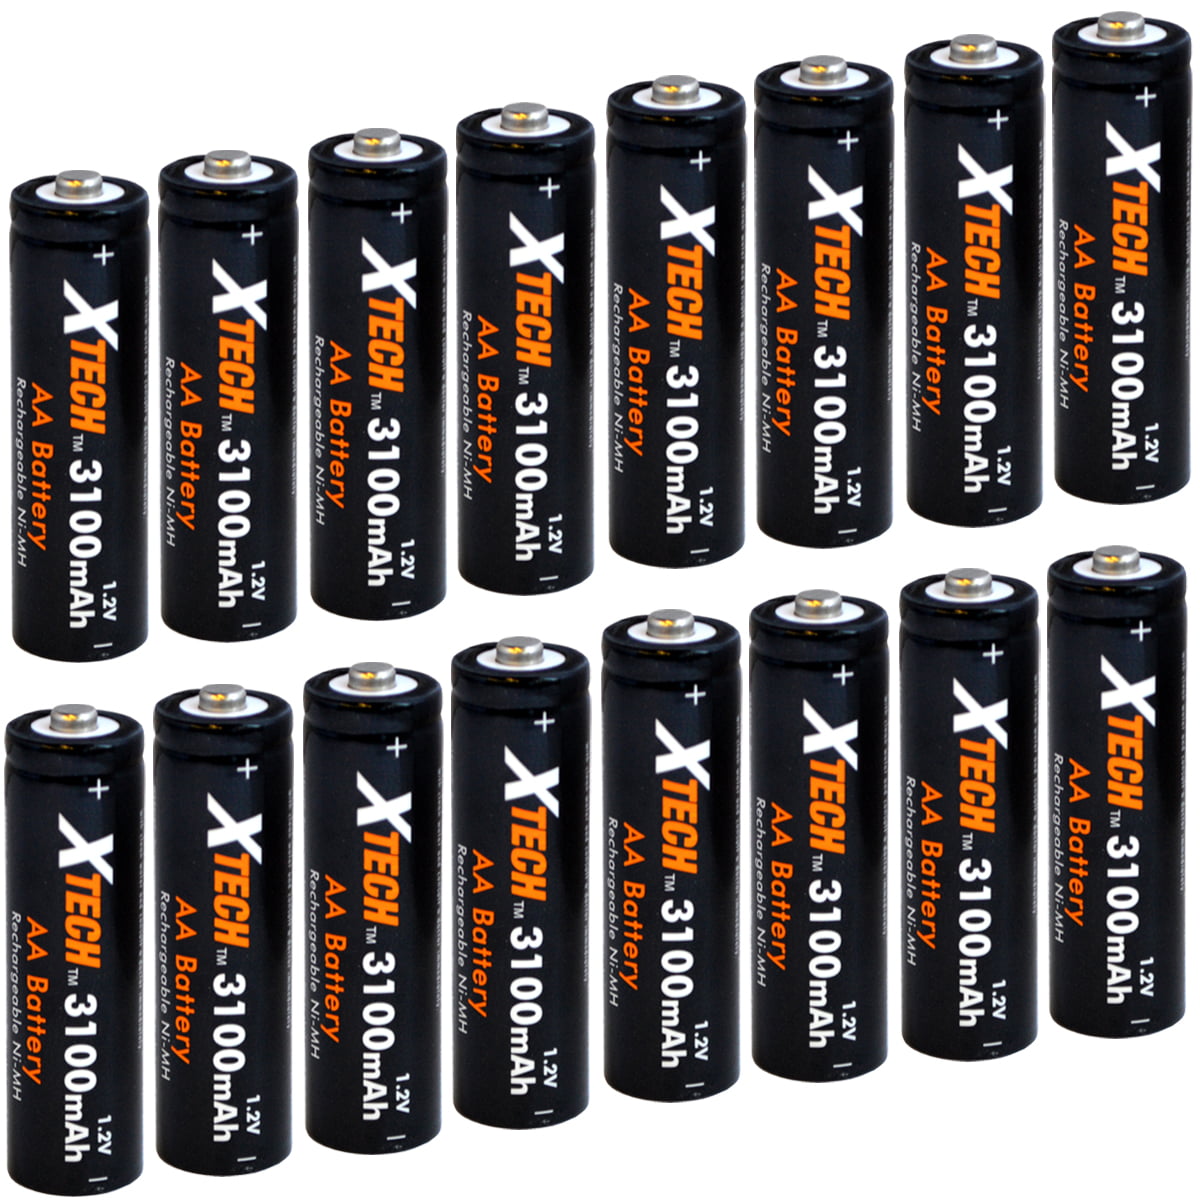 Xtech AA Ultra High-Capacity 3100mah Ni-MH Rechargeable Batteries 12 Pack 